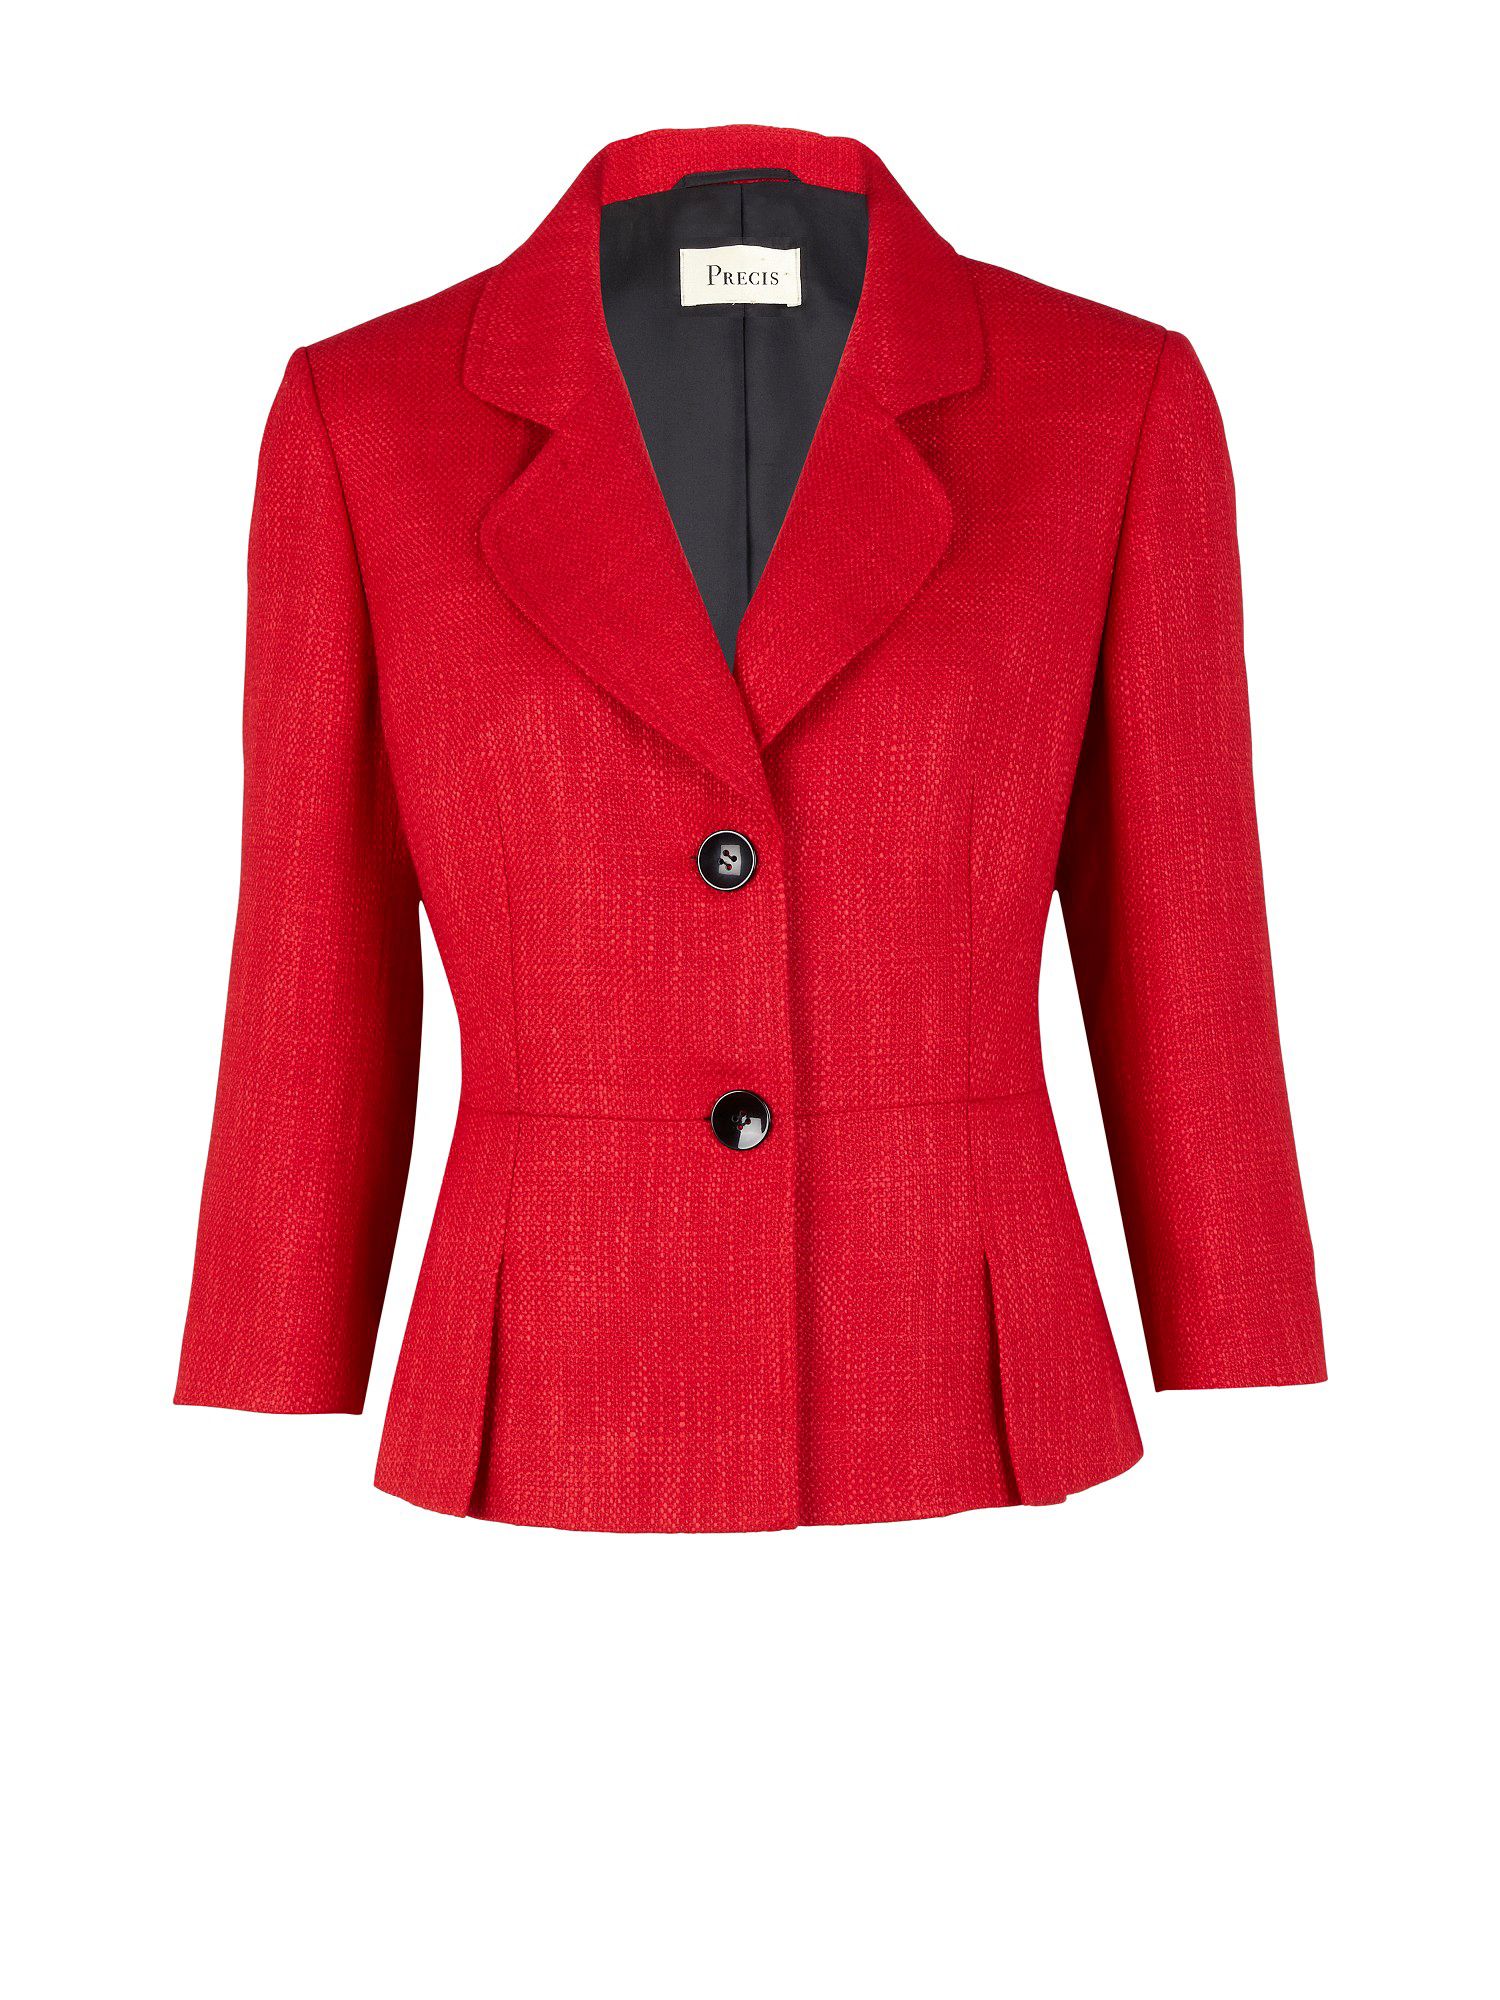 Precis Petite Scarlet Textured Jacket in Red | Lyst